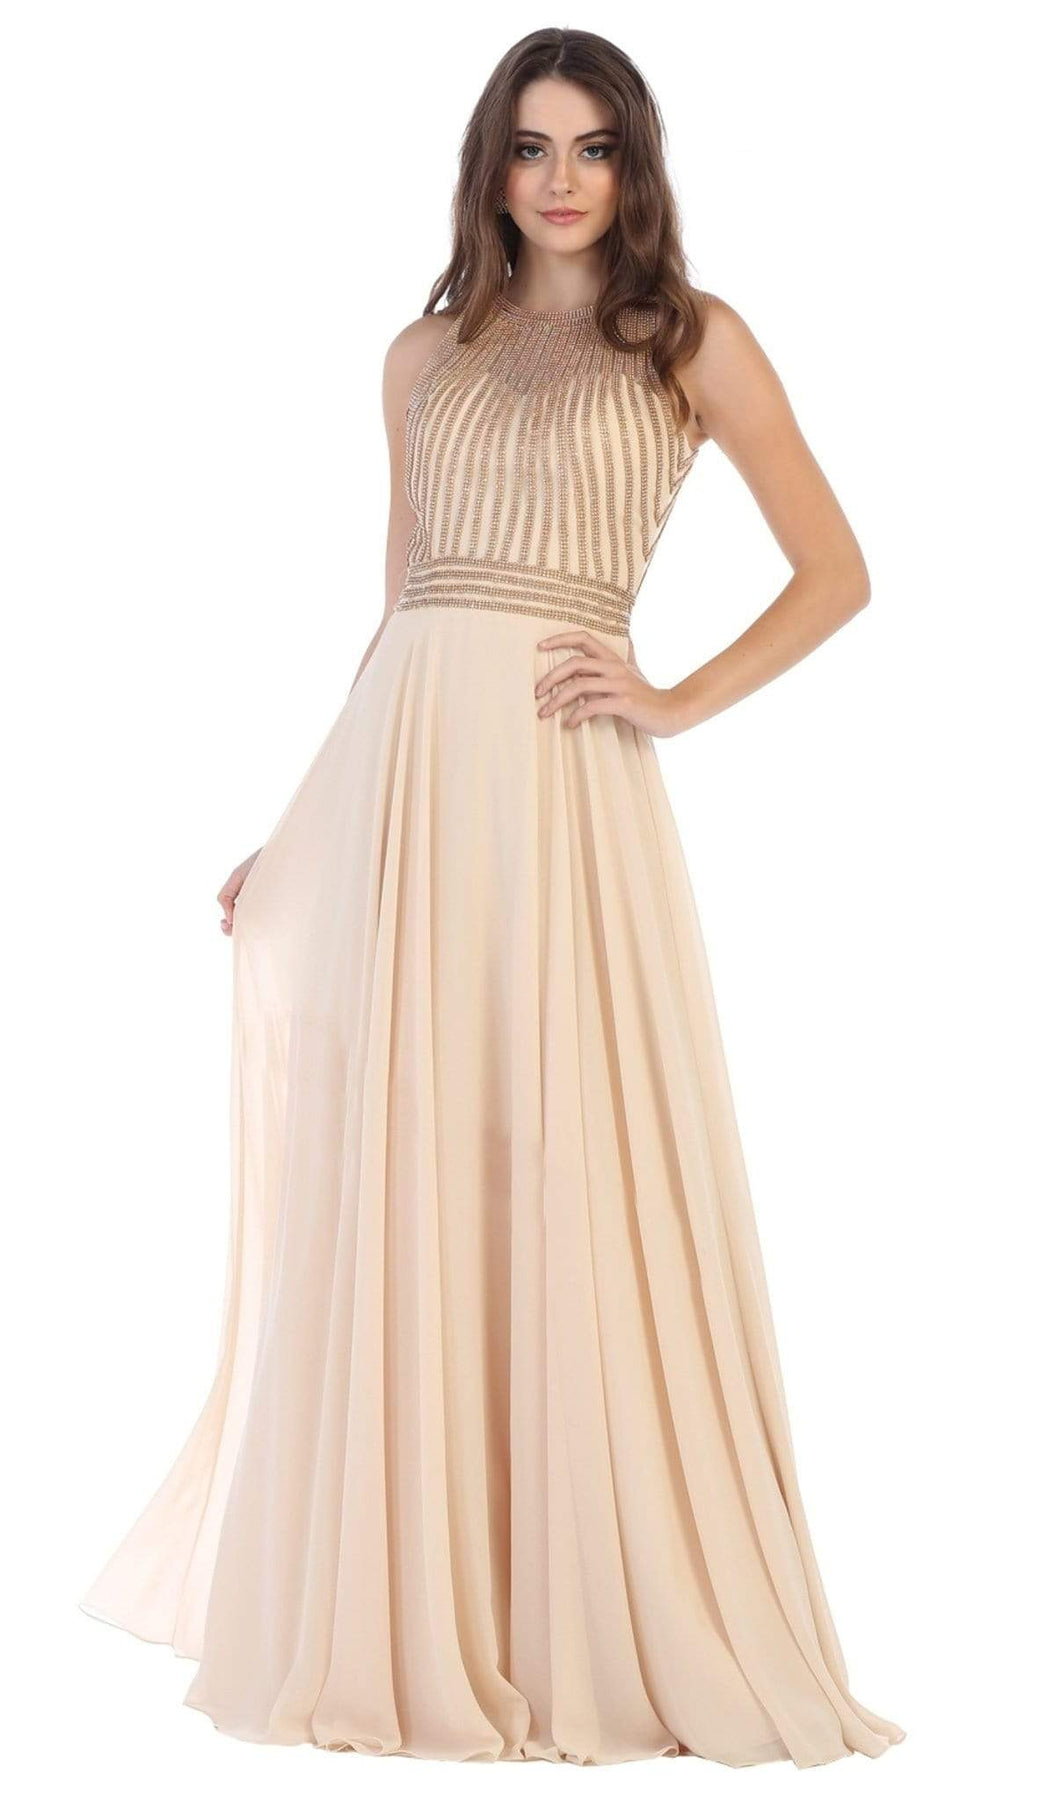 May Queen - MQ1586 Stripe Beaded Illusion Jewel Chiffon Gown Bridesmaid Dresses 4 / Champagne